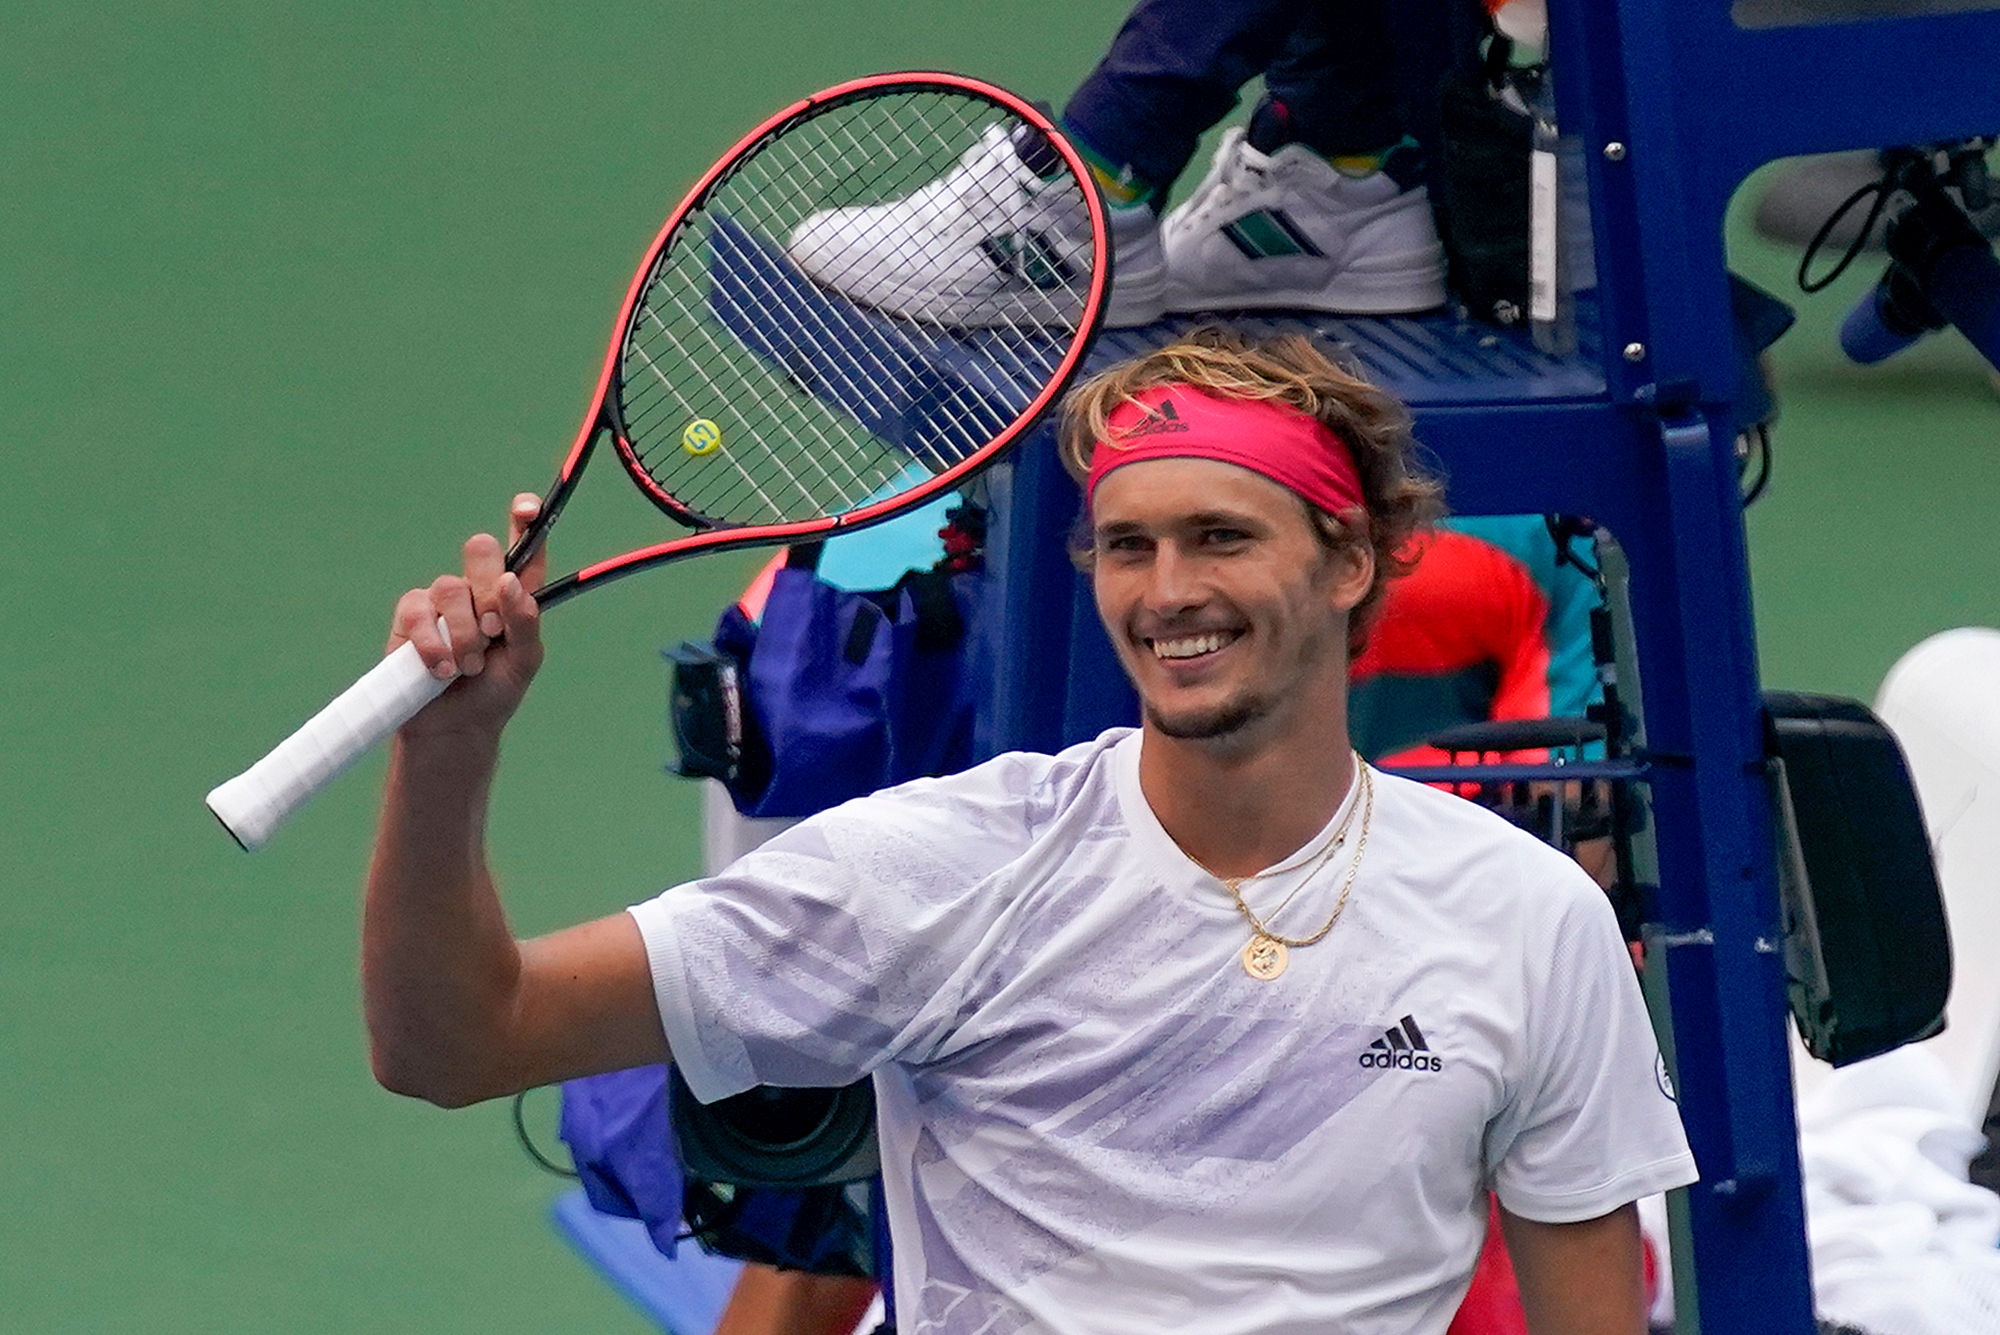 Tennis player Alexander Zverev says negative for COVID-19 after Roland Garros controversy